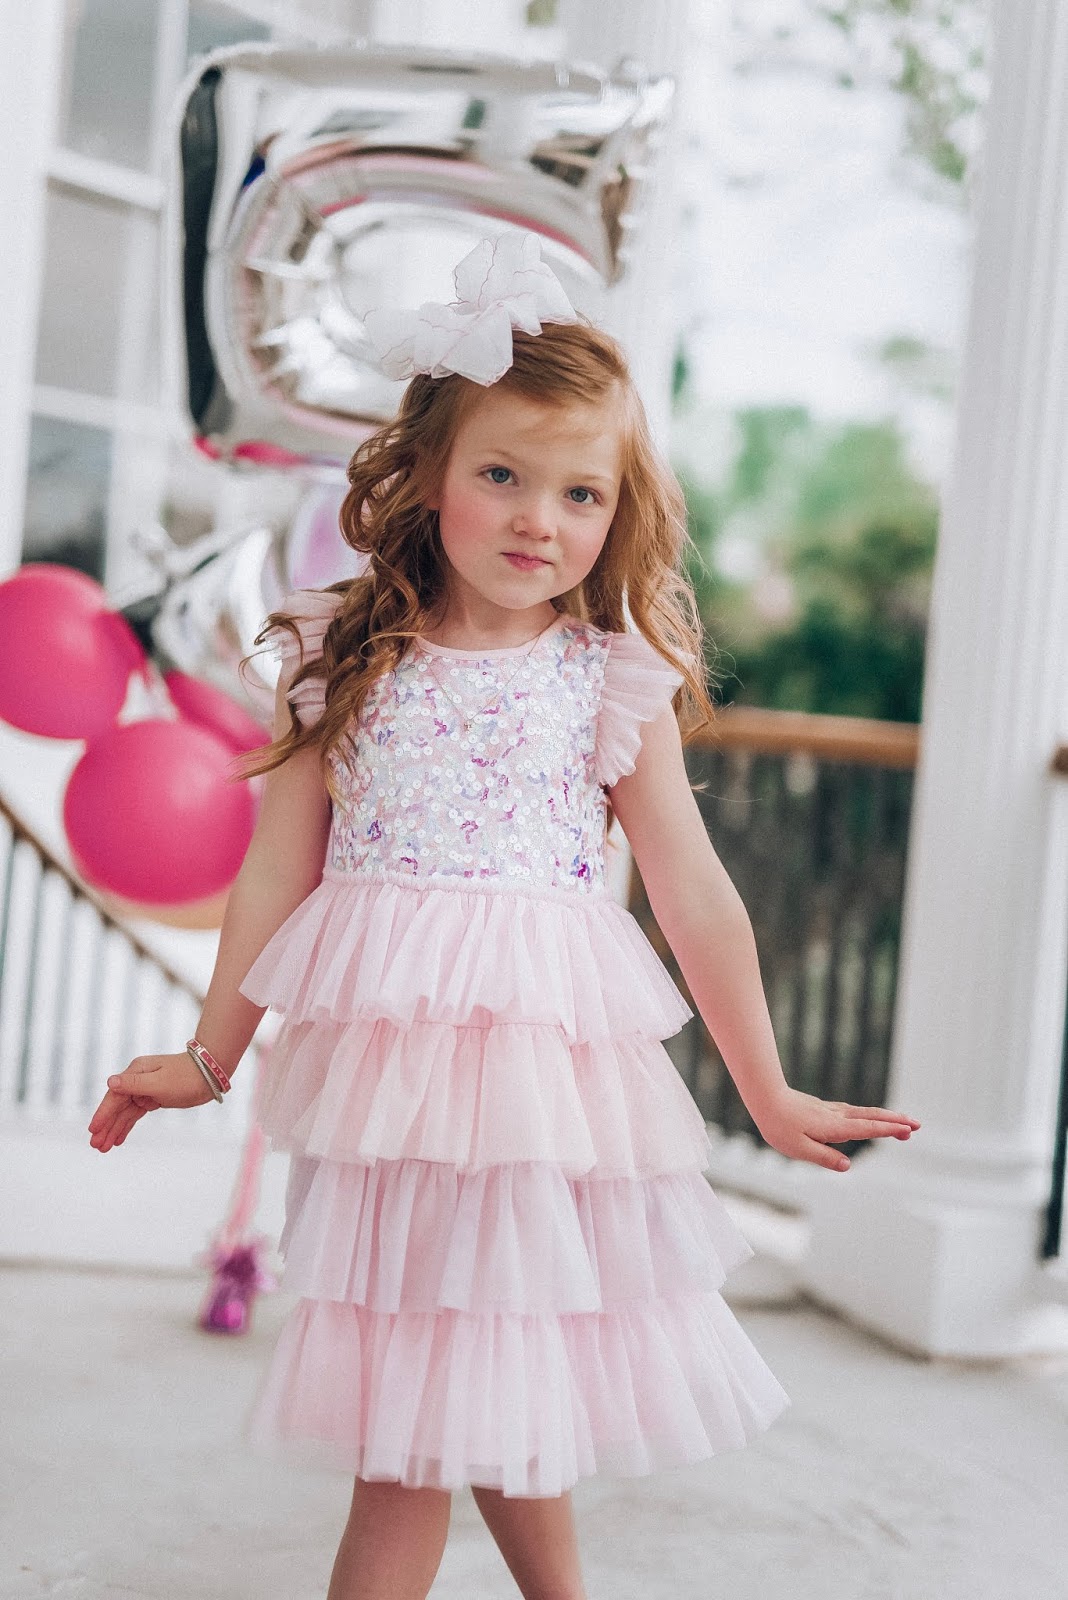 Happy 5th Birthday Madeline + a Little Message on Your Birthday - Something Delightful Blog